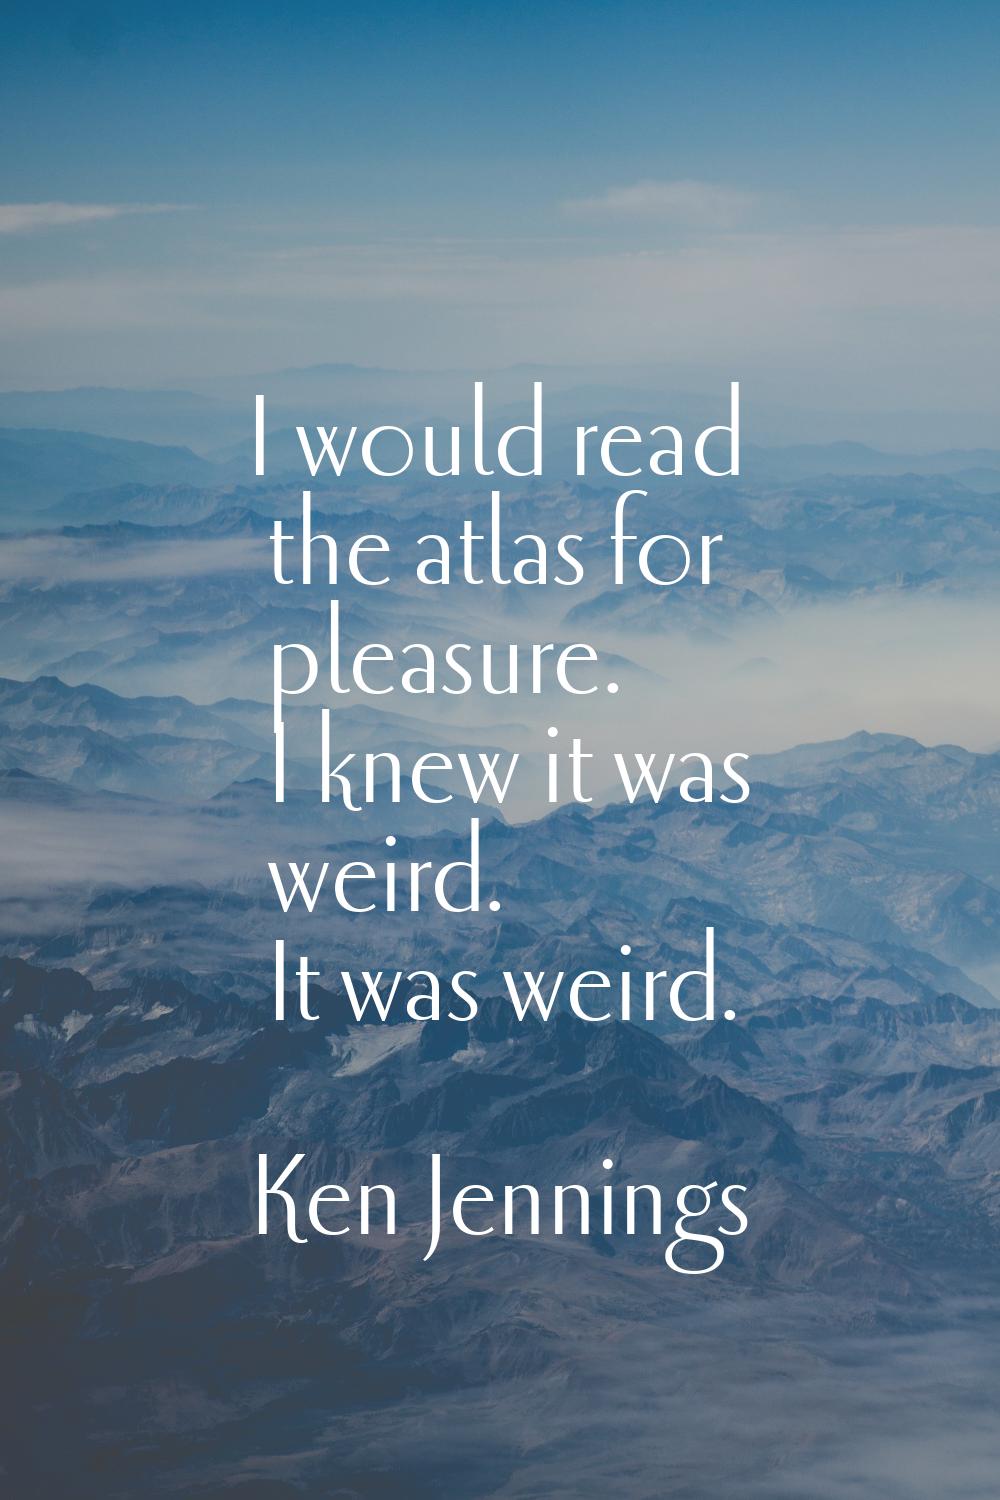 I would read the atlas for pleasure. I knew it was weird. It was weird.